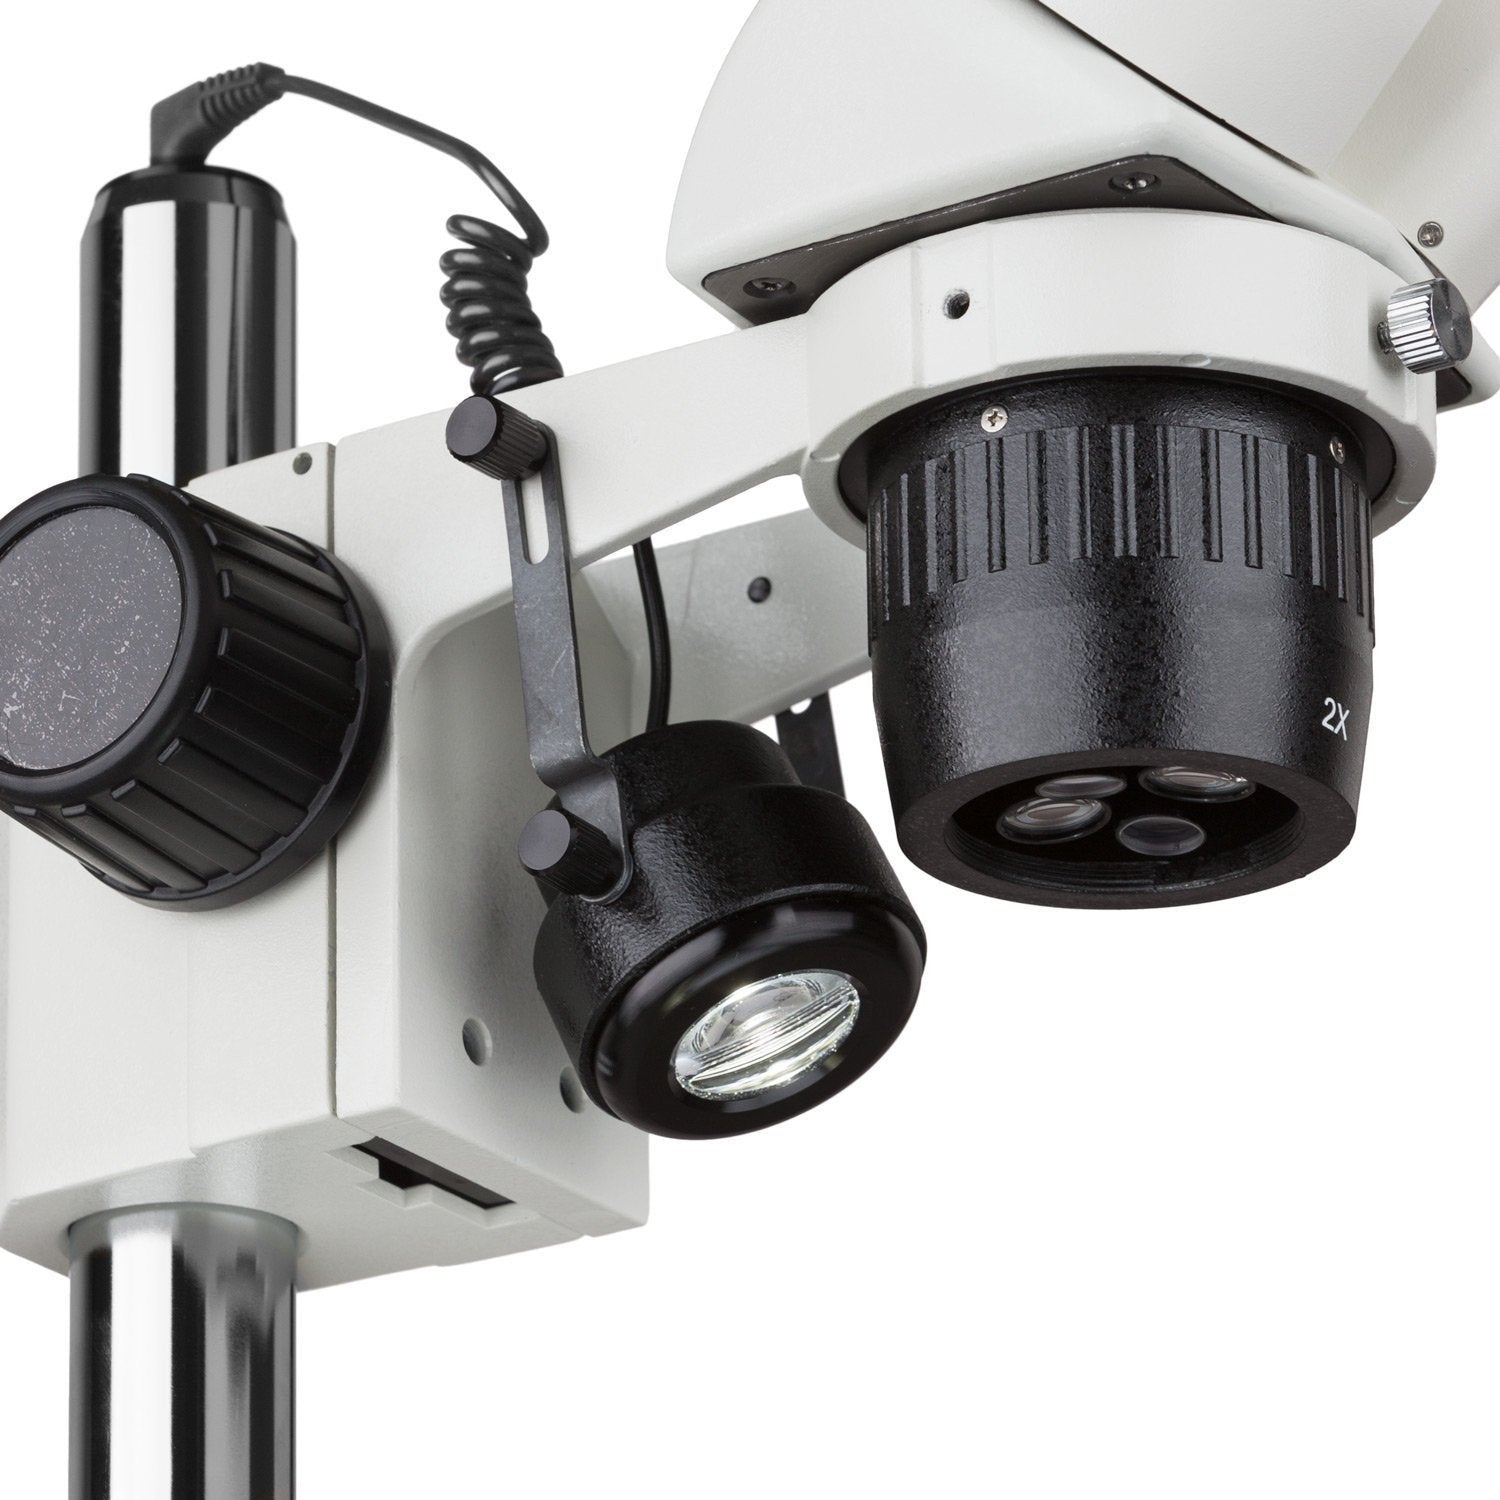 AmScope 10X-30X Multi-Power Pillar Stand Stereo Microscope with Top & Bottom LED Lights